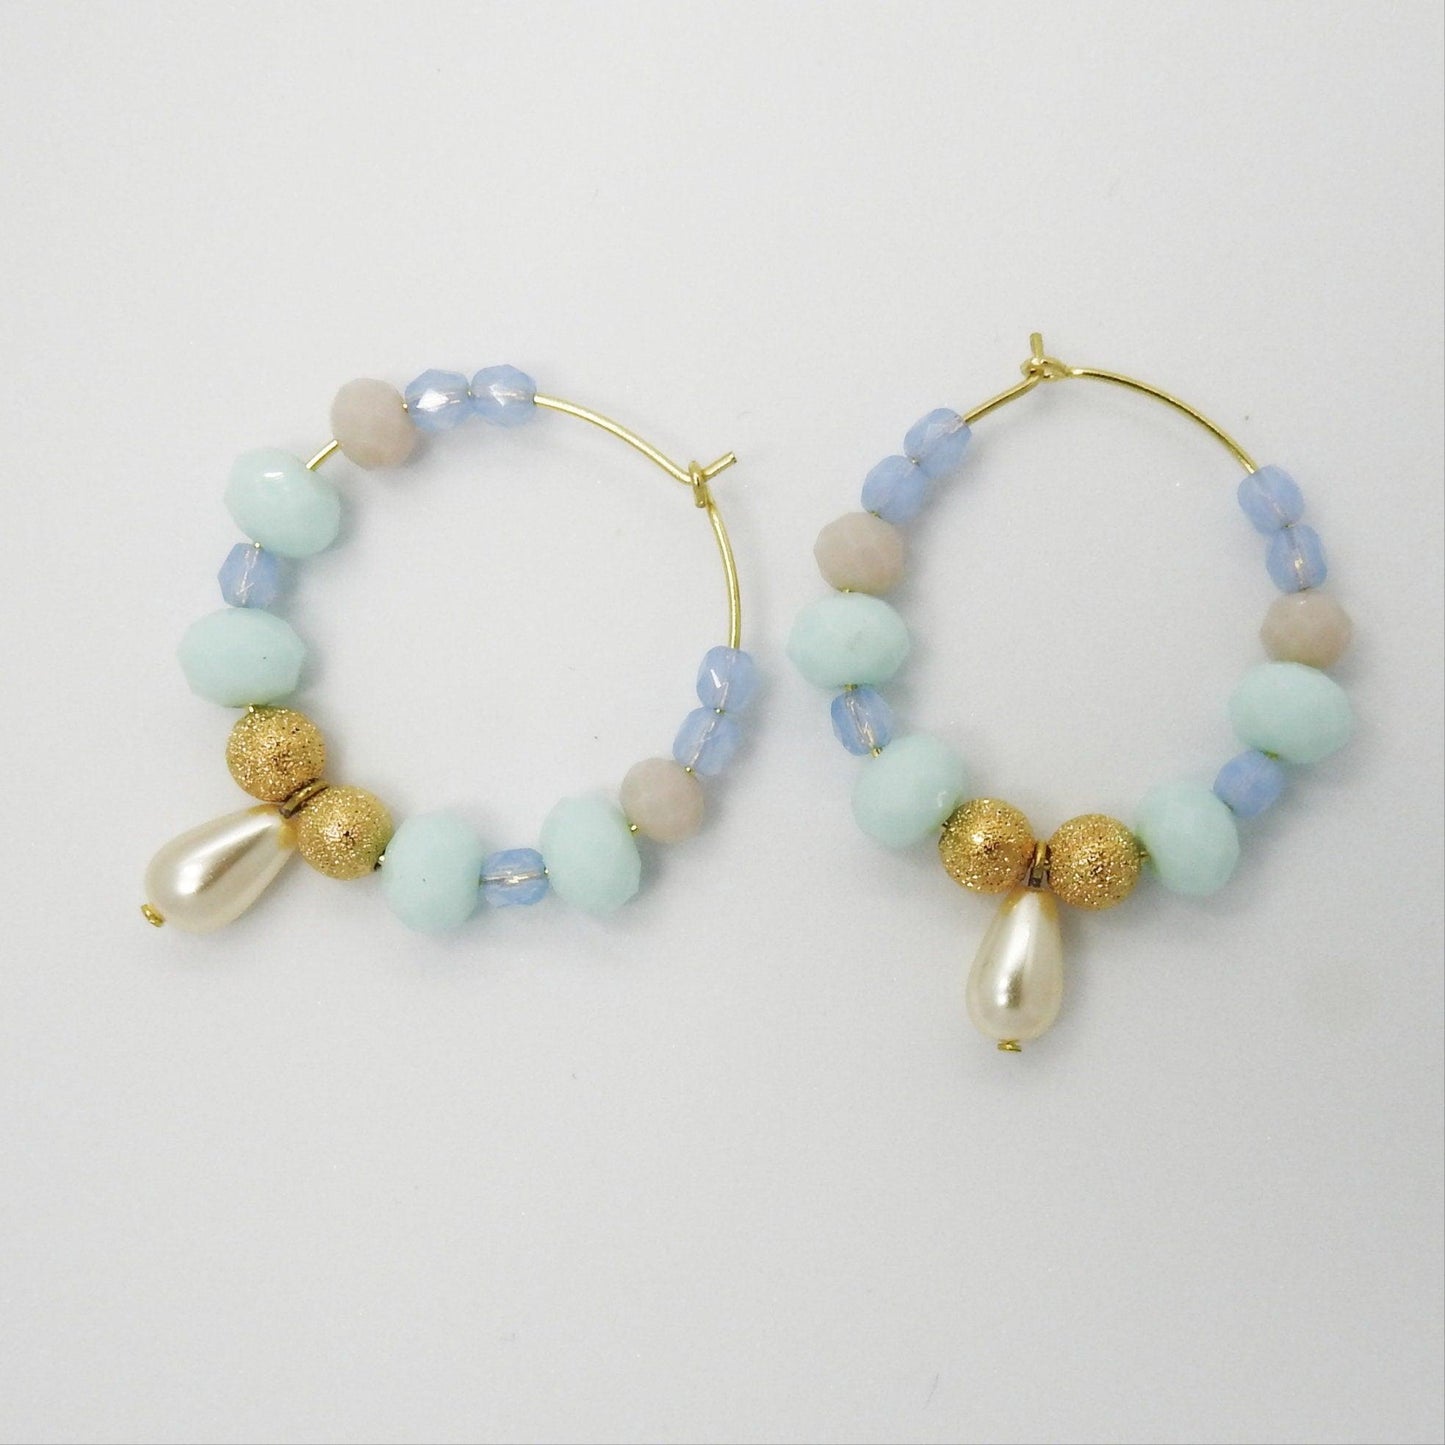 Aqua blue hoops earrings with a cute pearl drop charms. Pretty multi colored gifts ideas for women. Party earrings 30 mm 1.5''